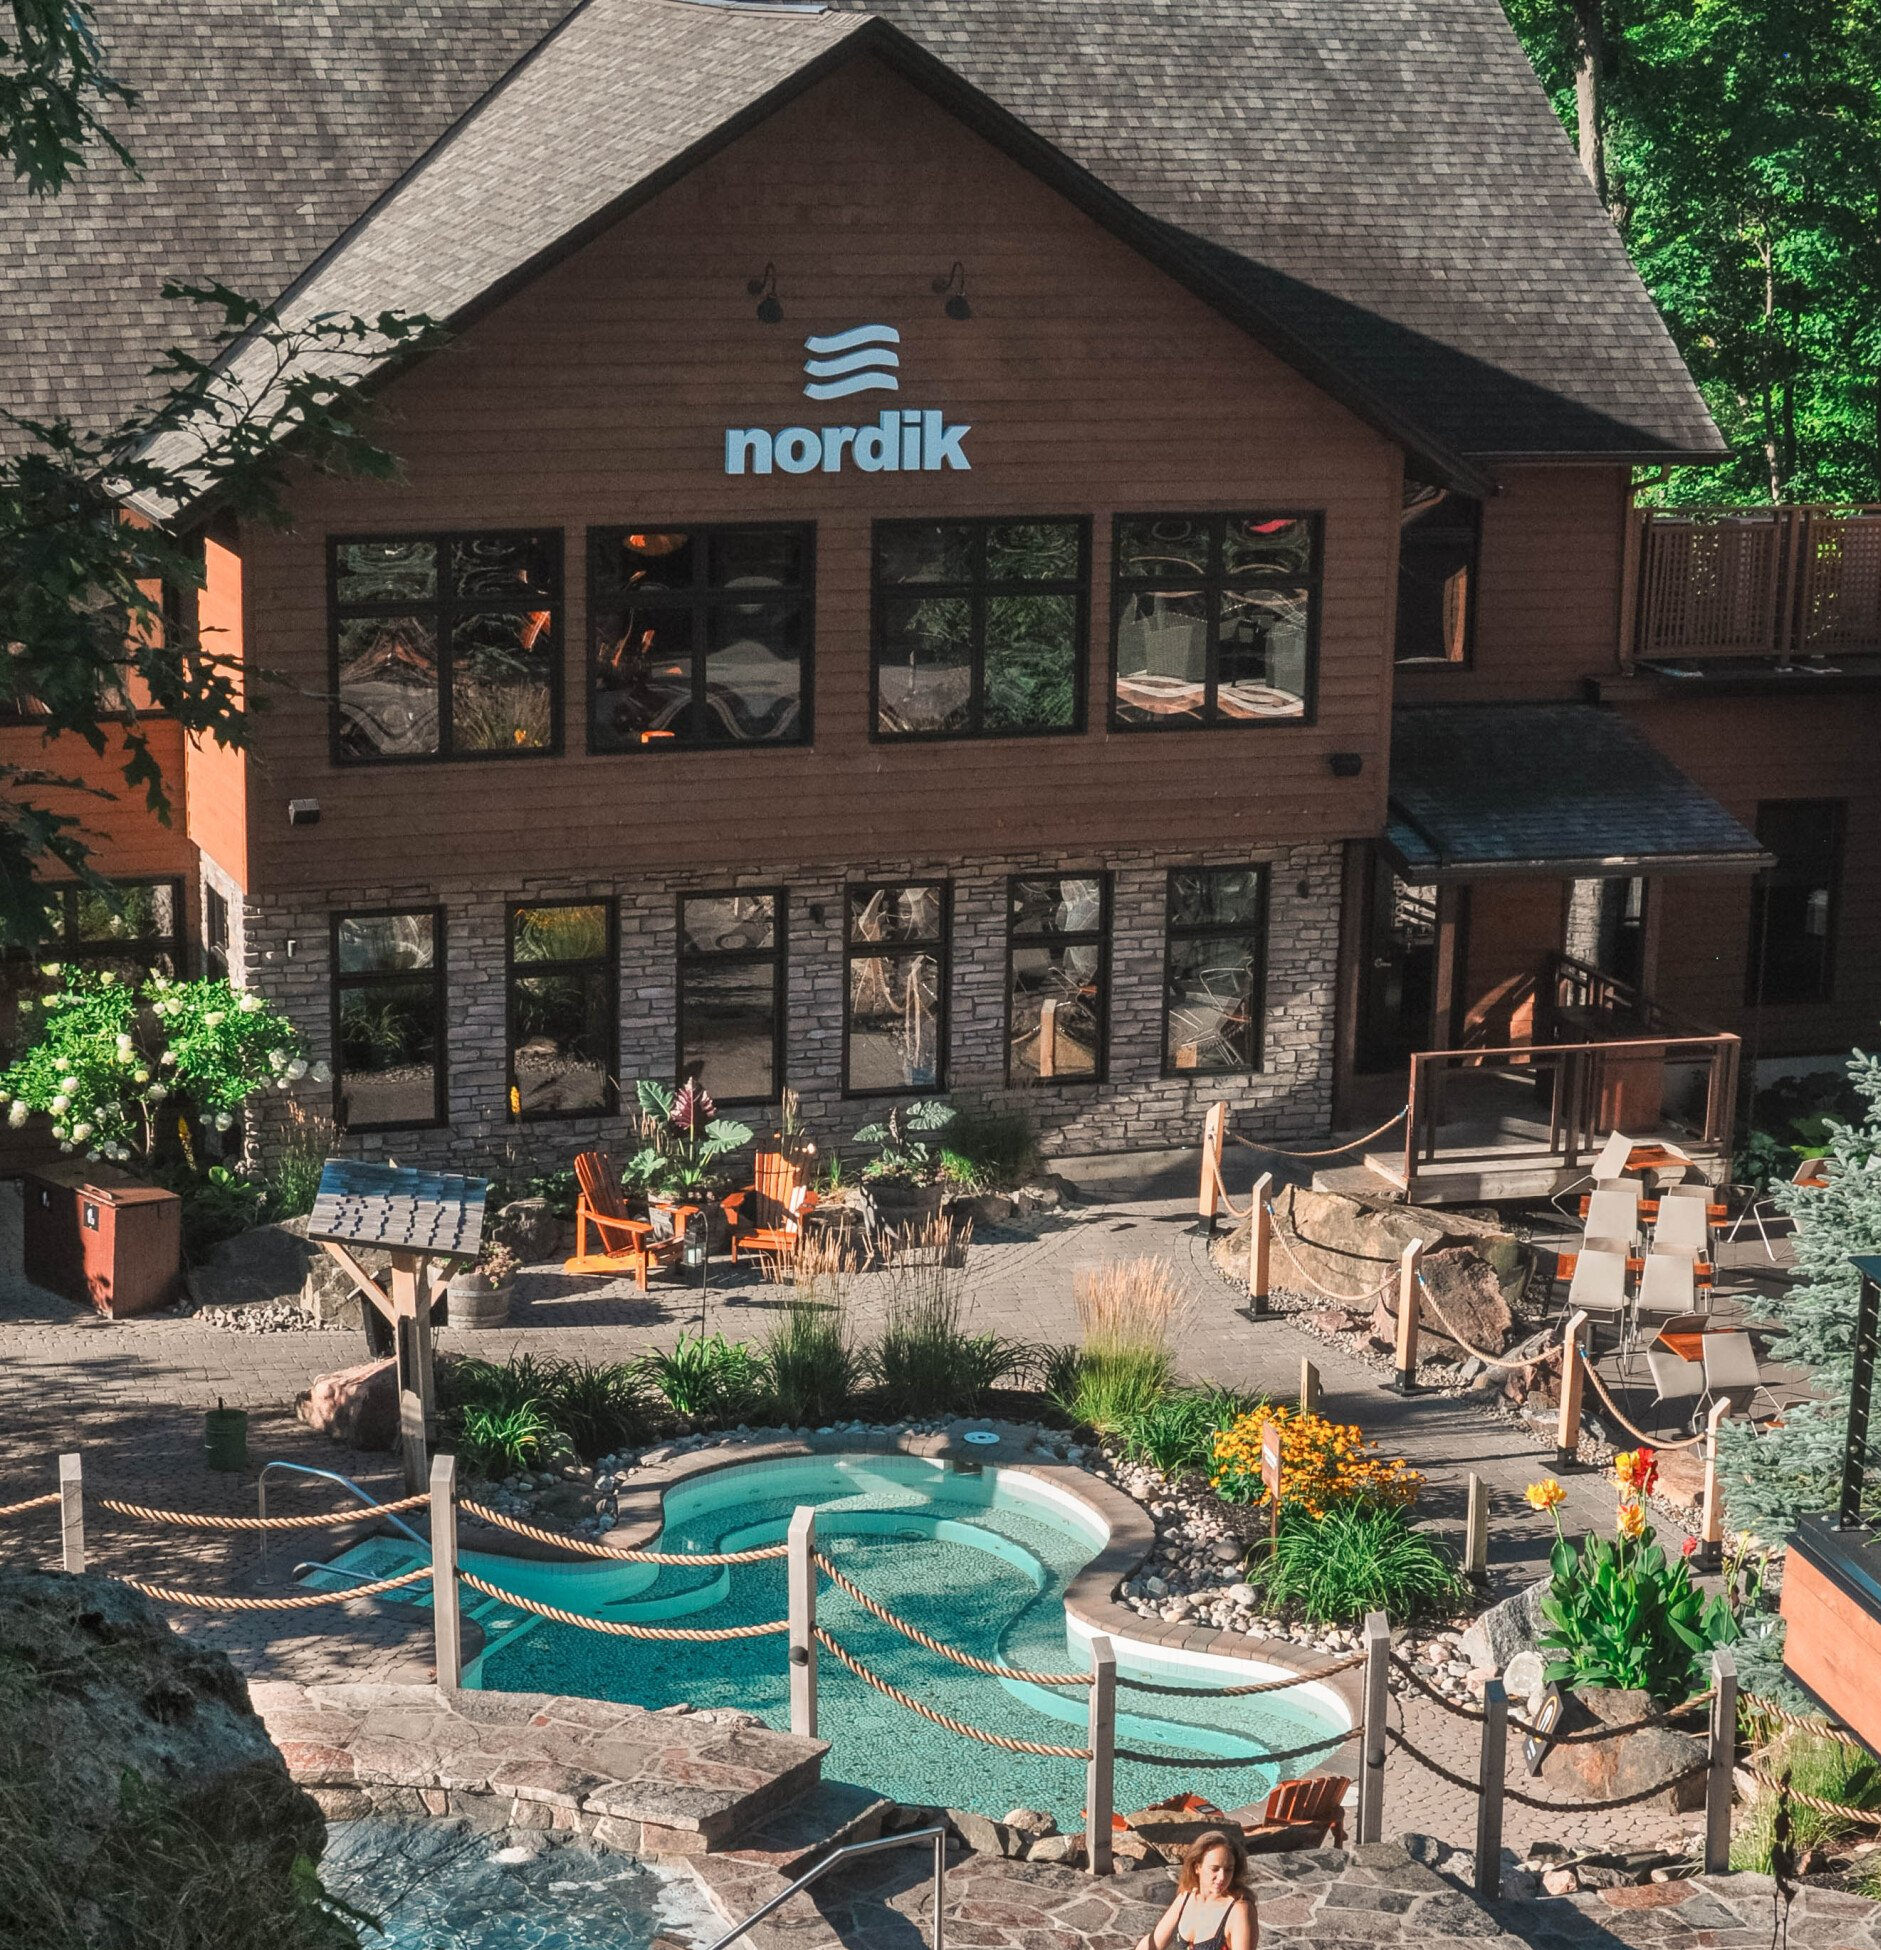 Elevated shot of Nordik Spa's facility and outdoor pools